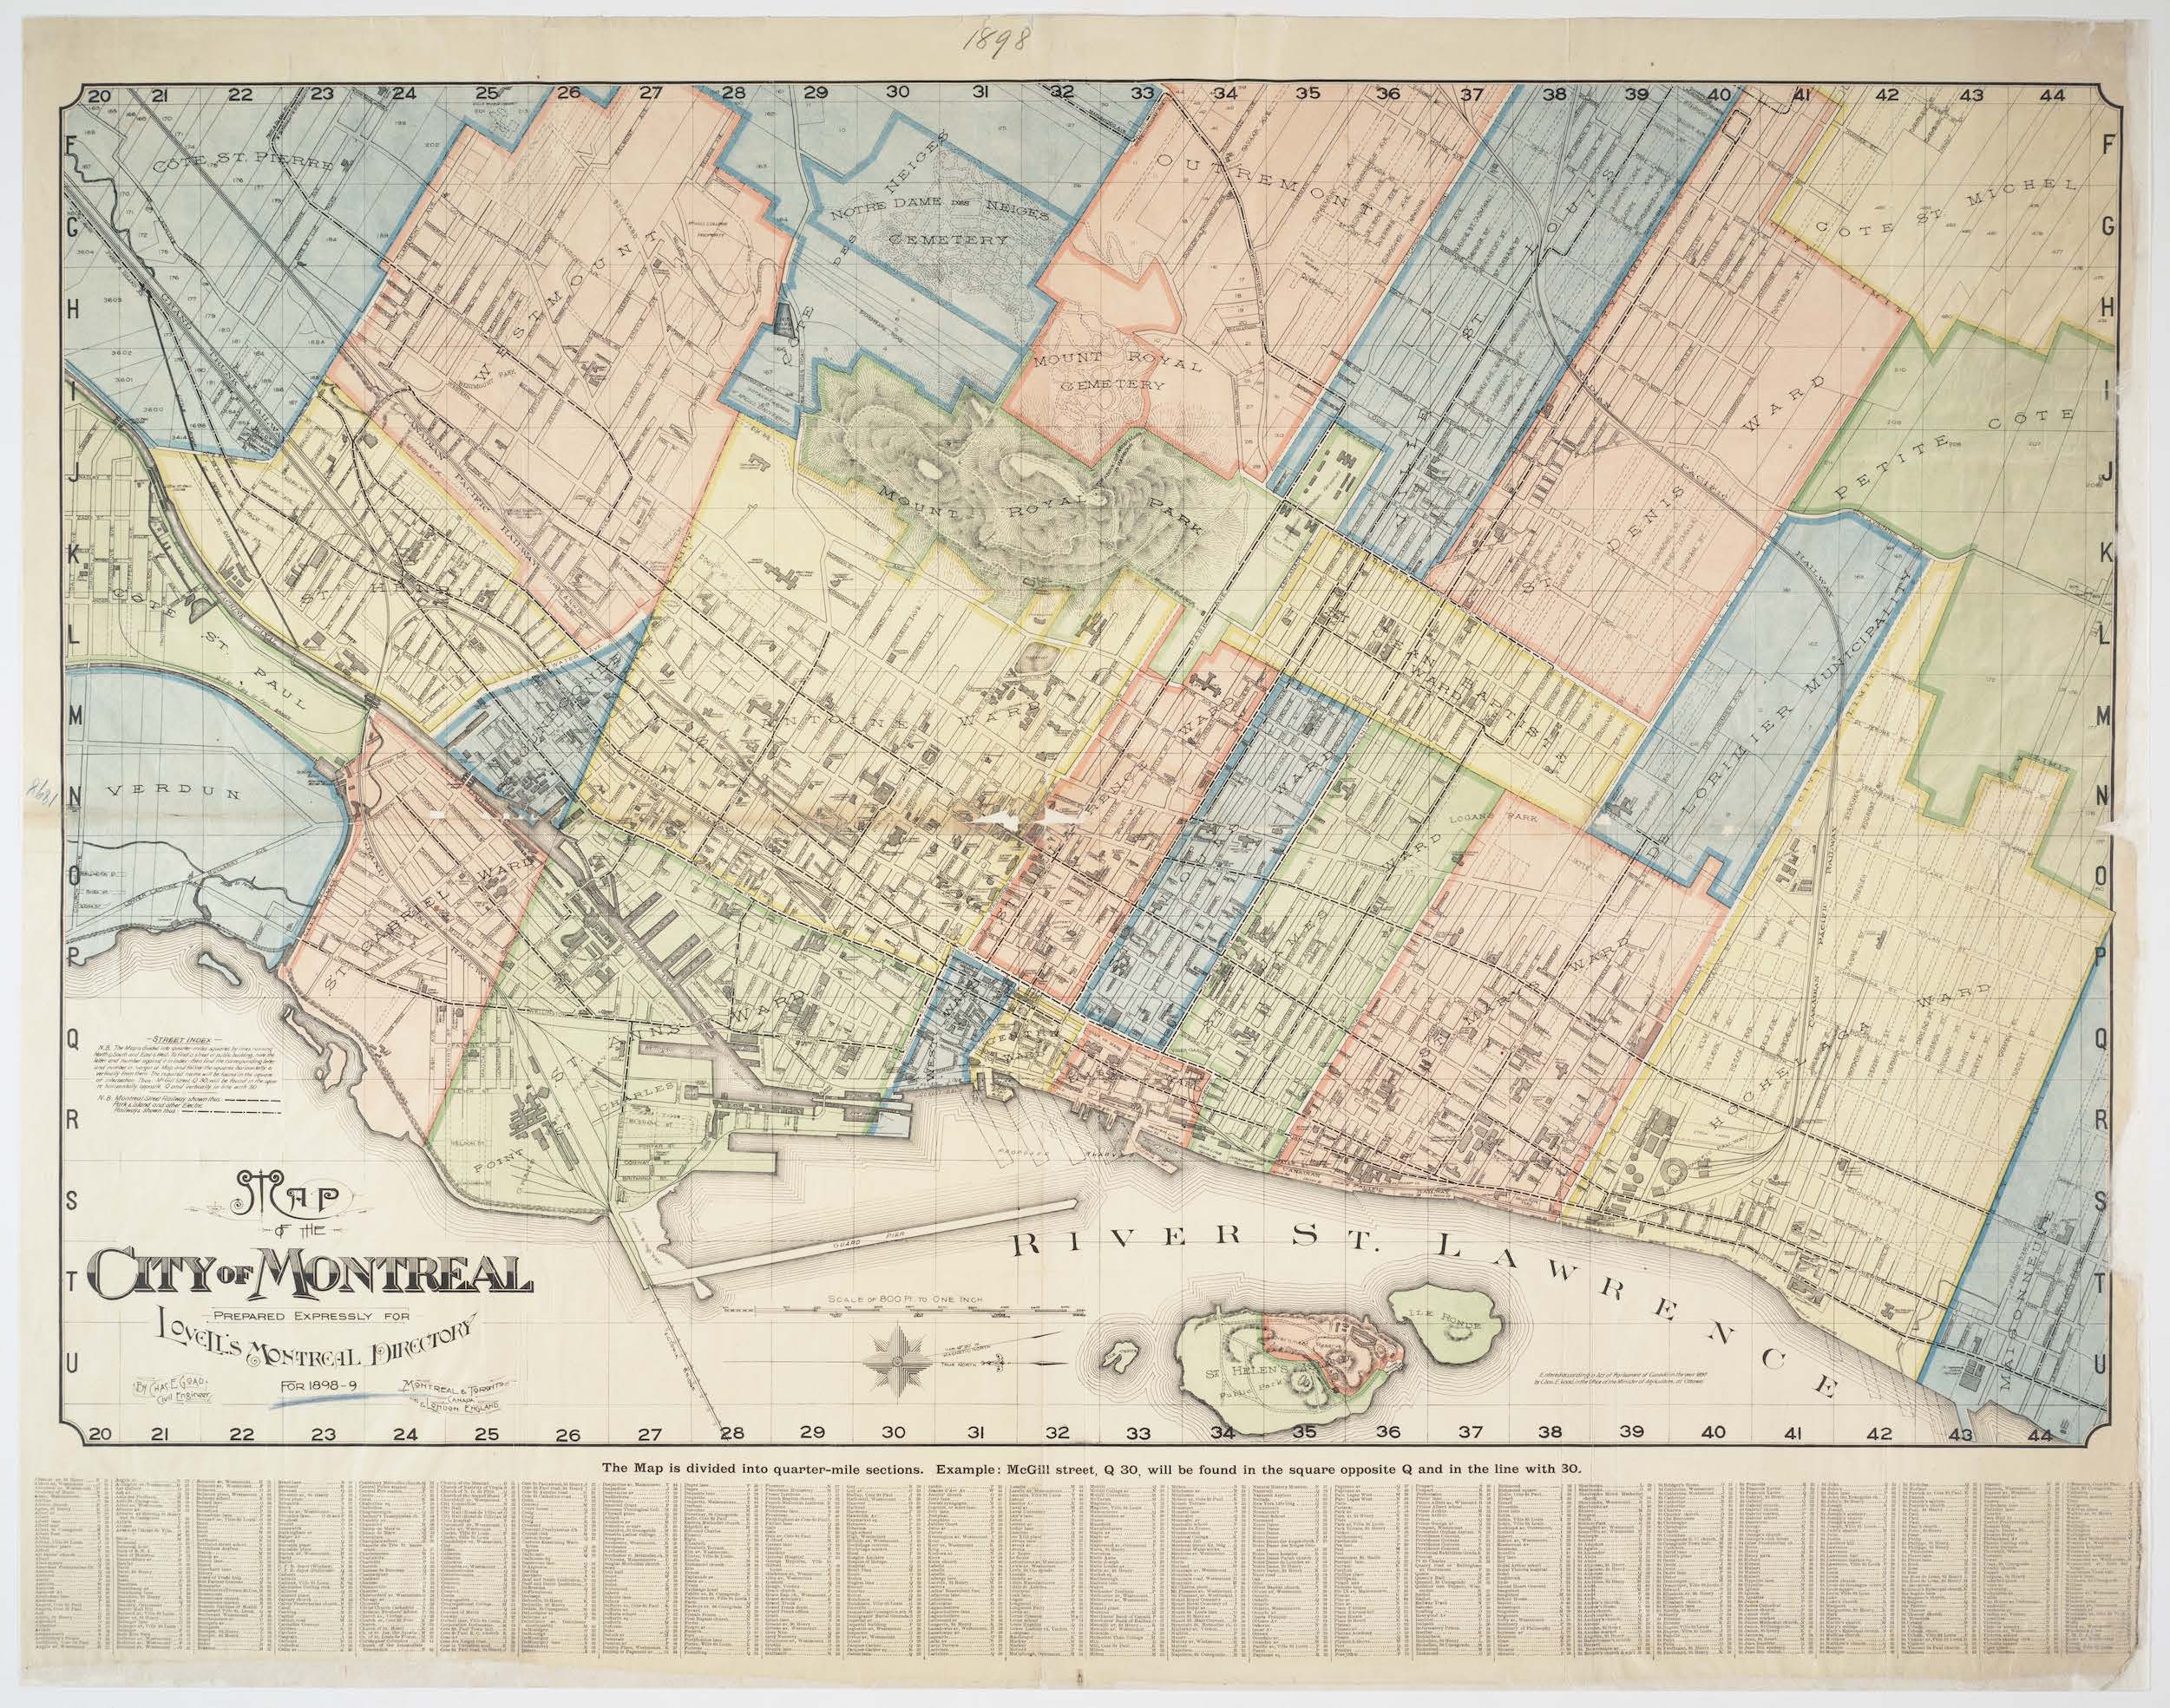 Map of the city of Montreal : prepared expressly for Lovell's Montreal Directory for 1898 by Charles E Goad.